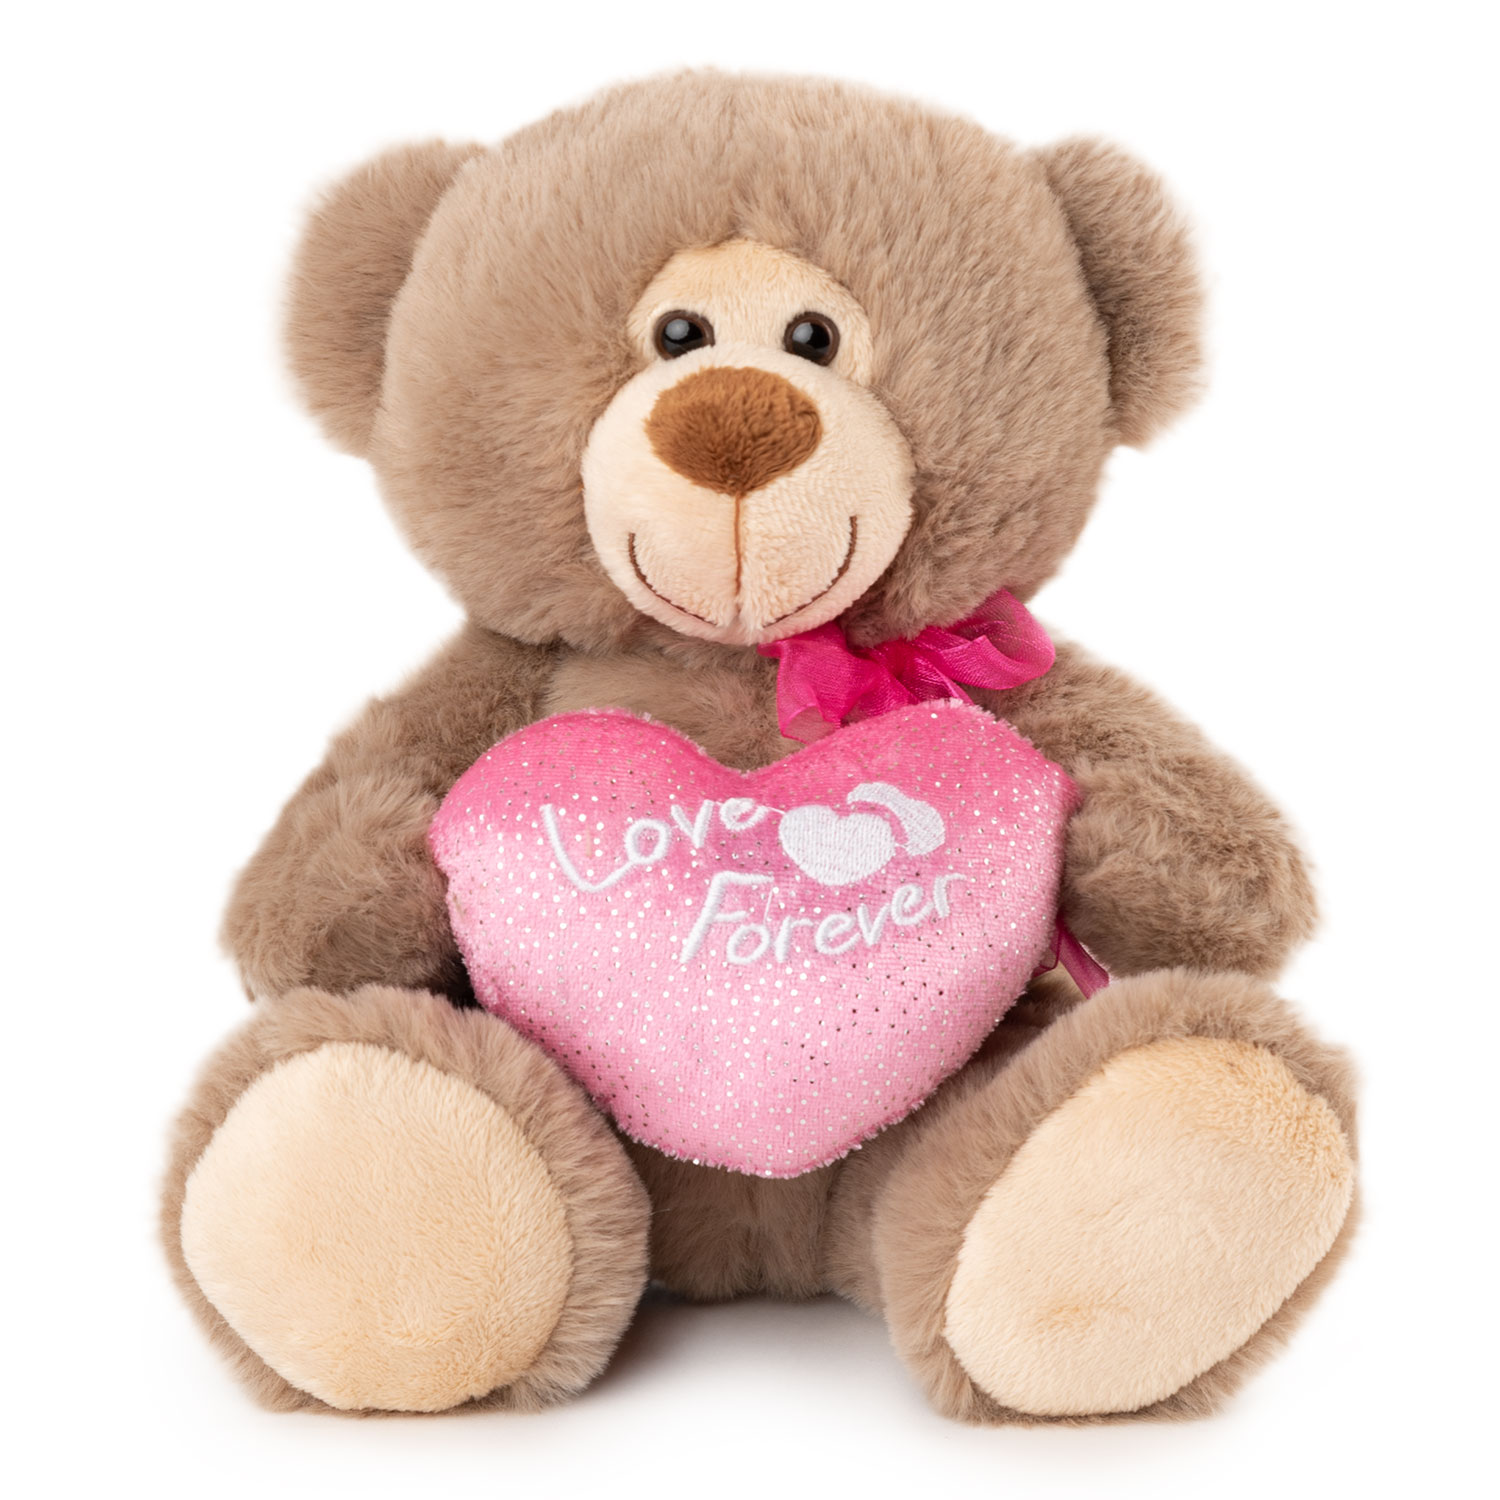 Bear with a heart "Love Forever" - Gray